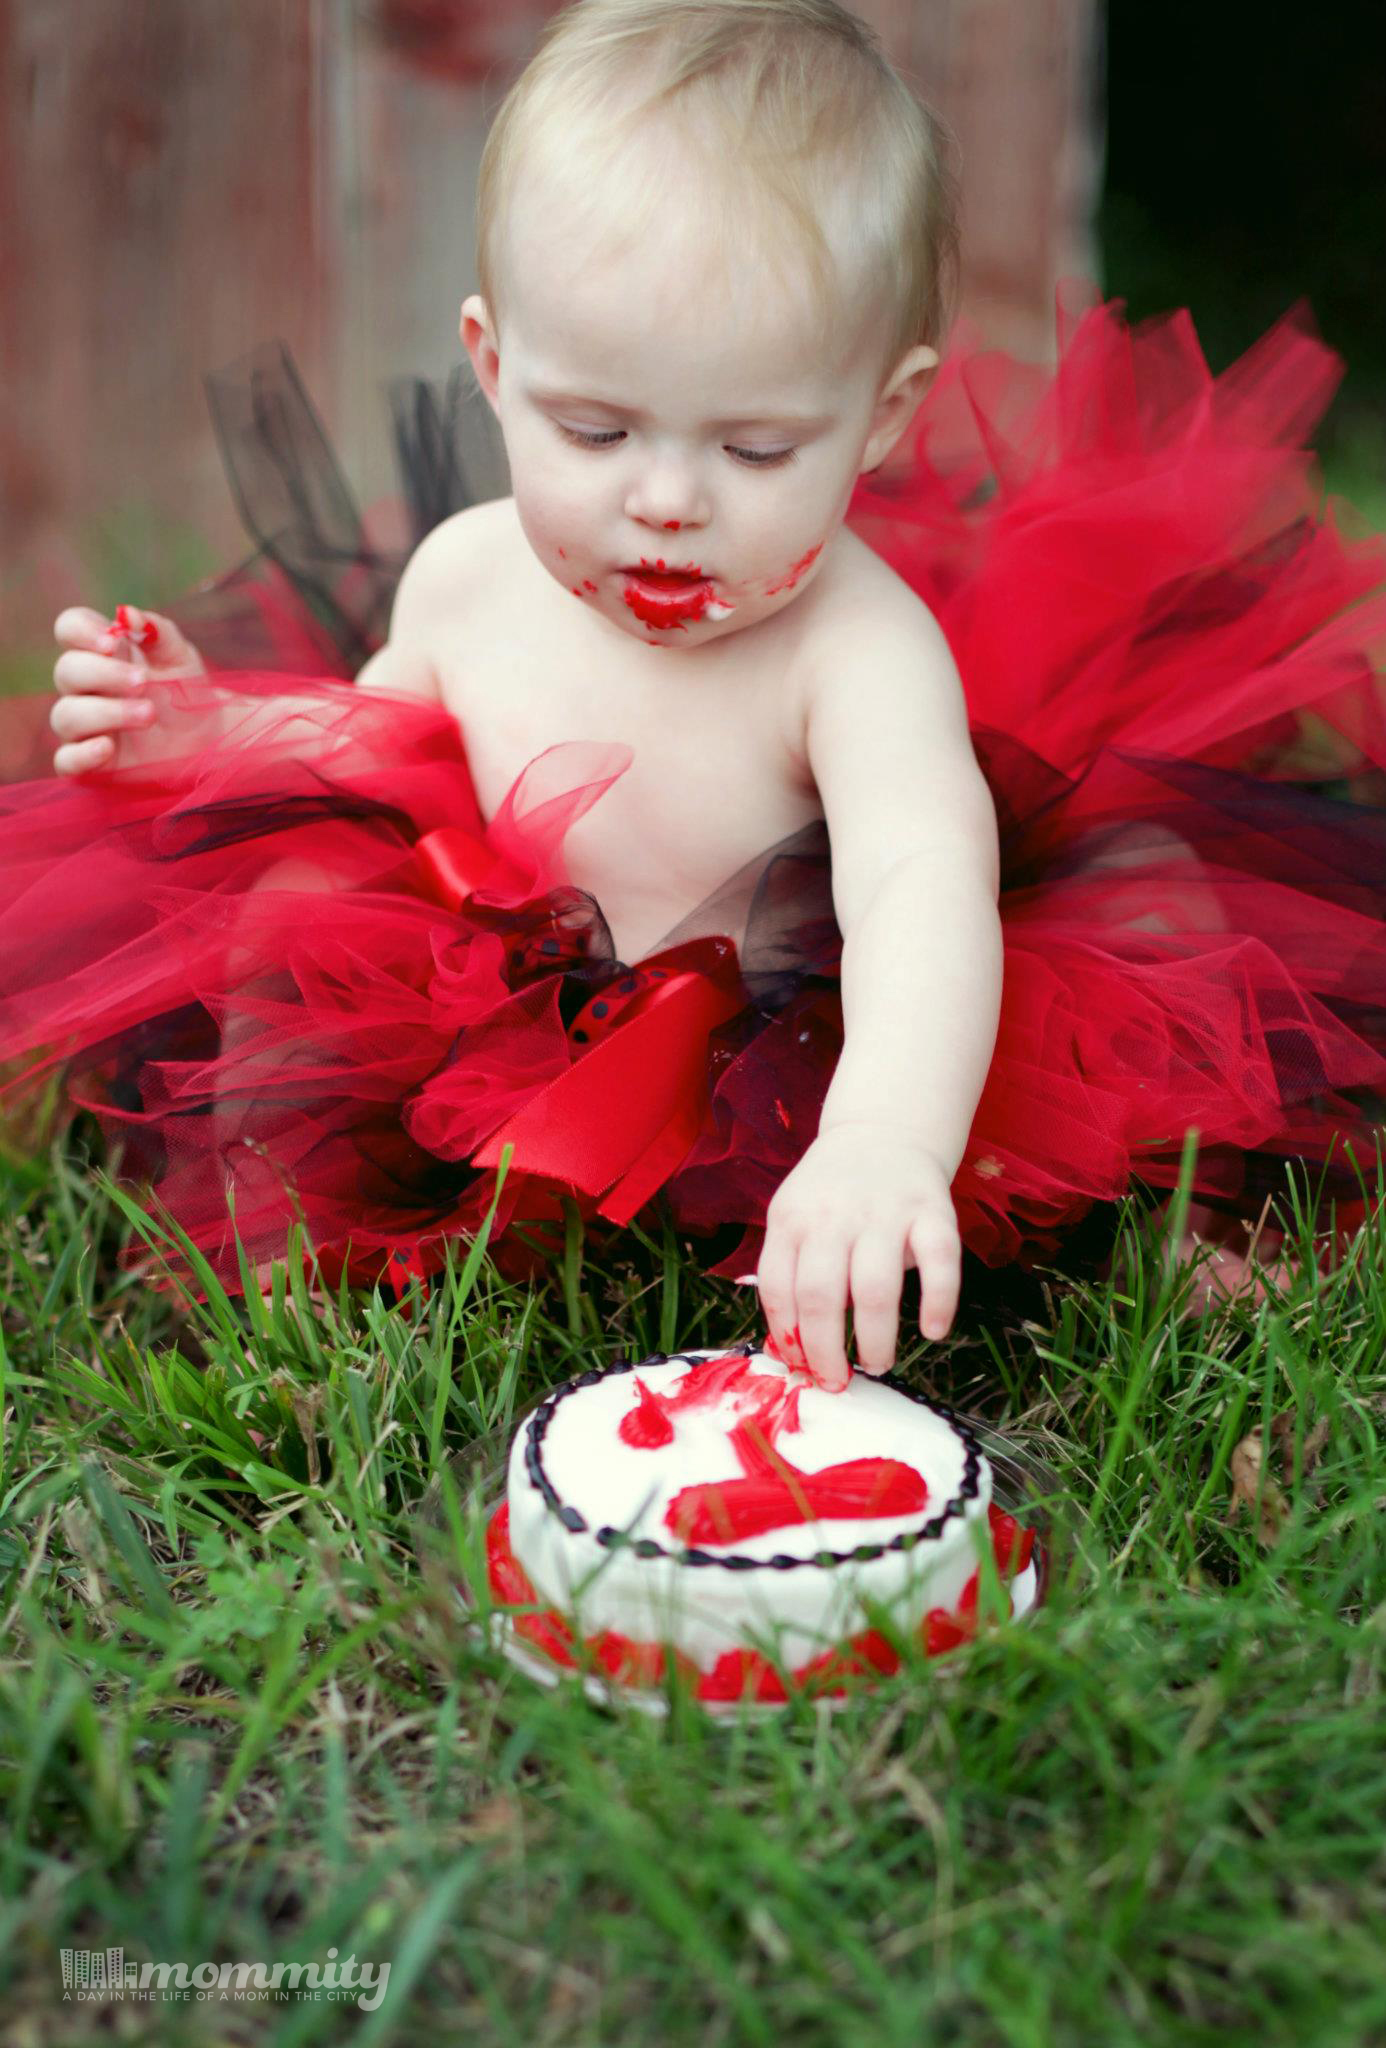 Make Your Baby's First Birthday Special at Babie's"R"Us